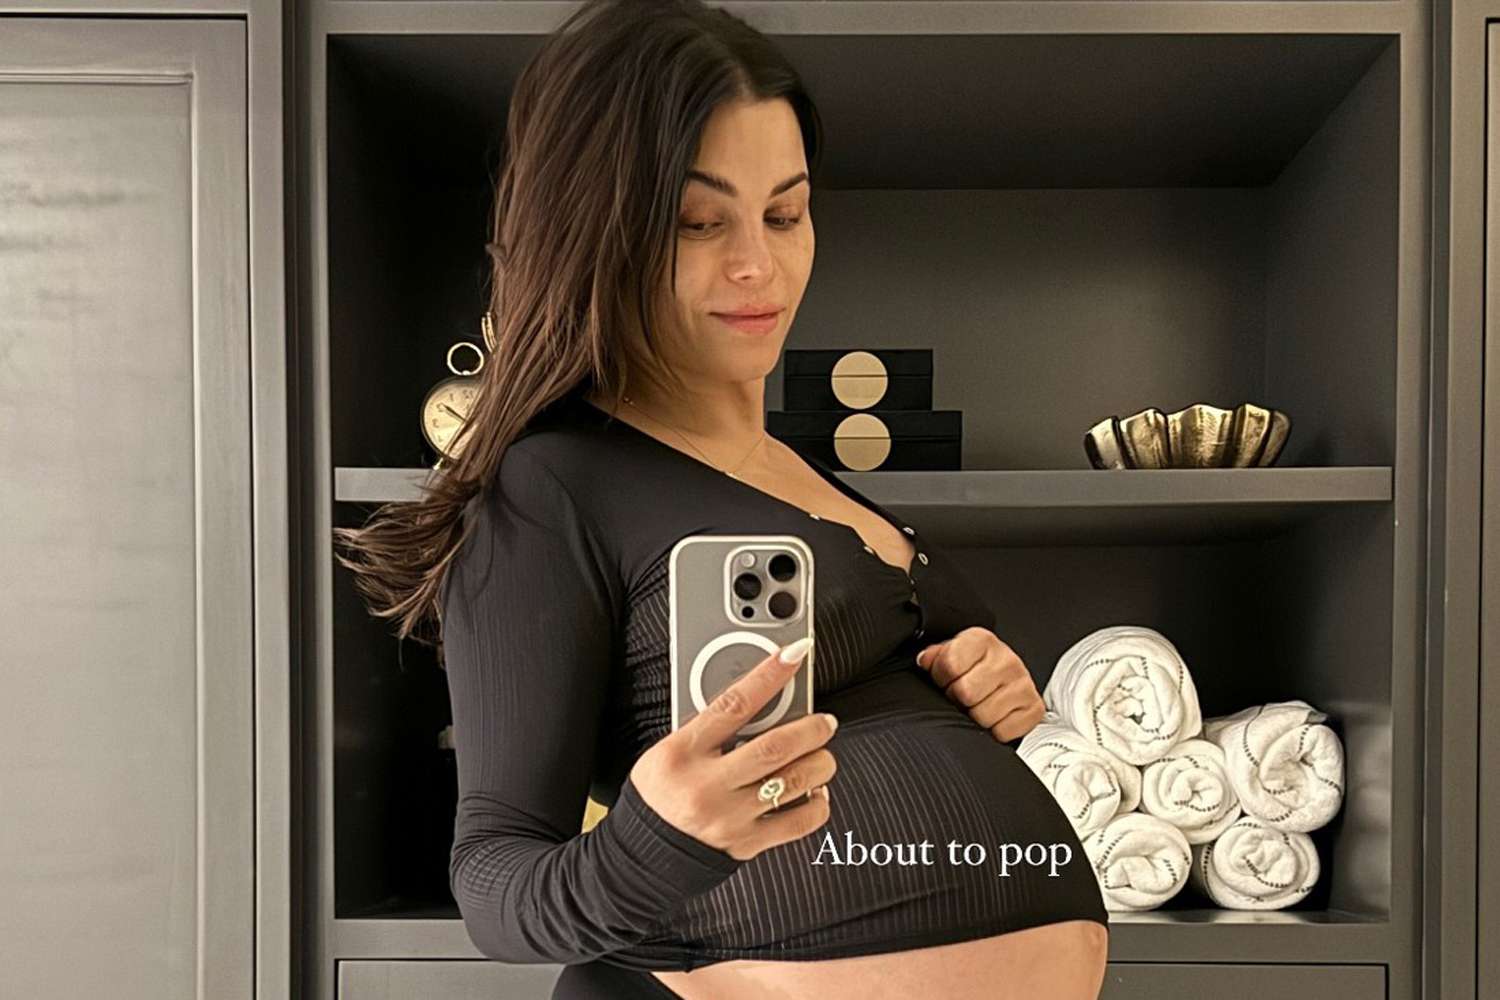 Pregnant Jenna Dewan Says She's 'About to Pop' and Dealing with ‘Lotsa Braxton Hicks’